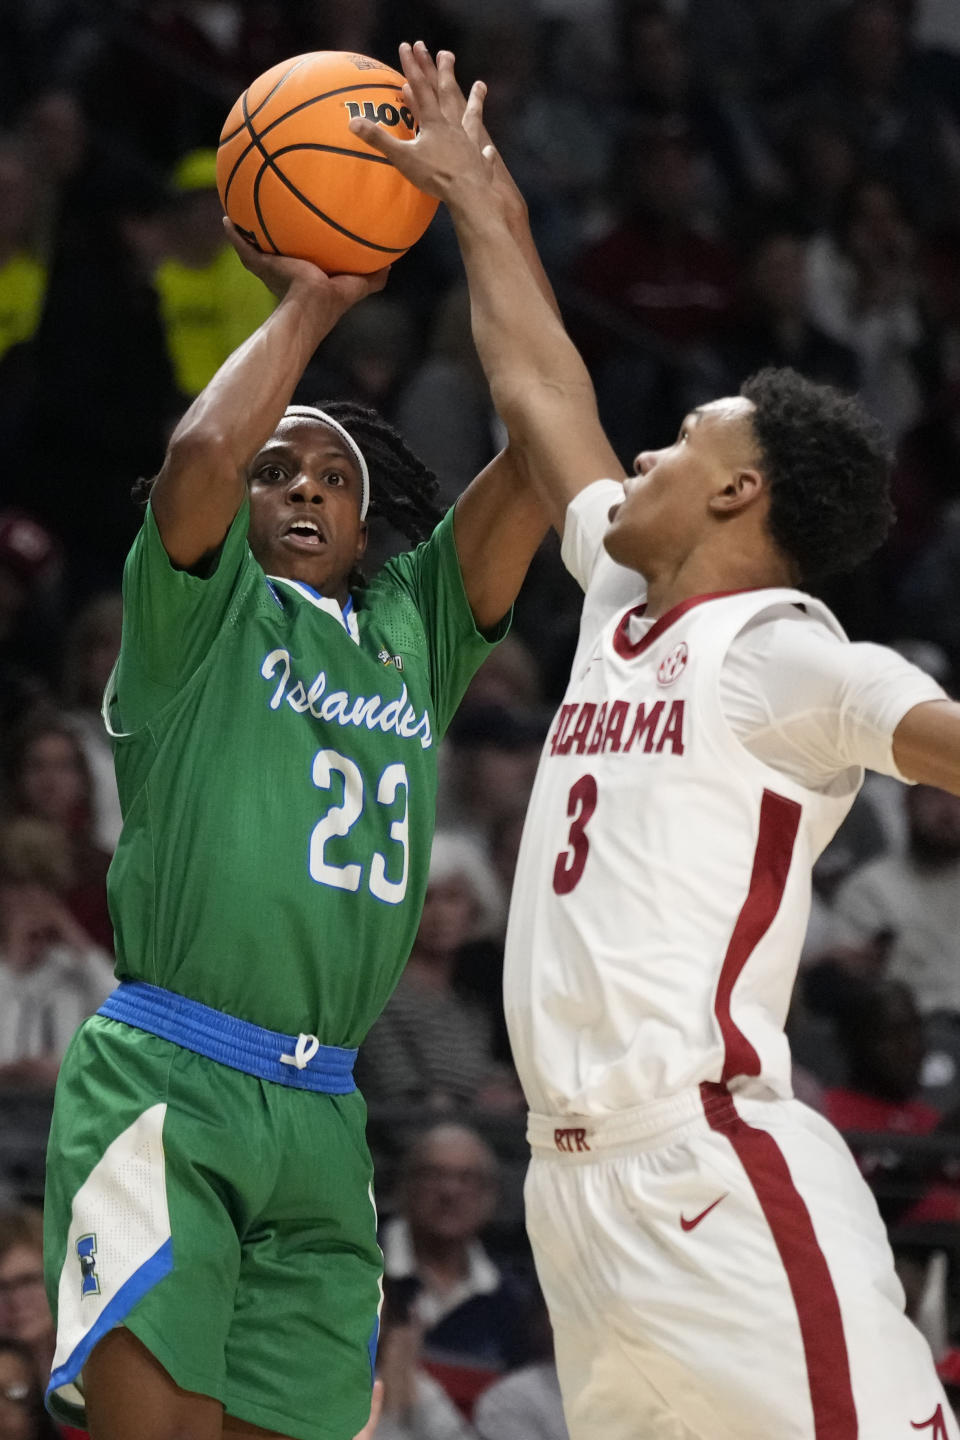 Texas A&M-Corpus Christi guard Ross Williams (23) has his shot blocked by Alabama guard Rylan Griffen (3) in the first half of a first-round college basketball game in the NCAA Tournament in Birmingham, Ala., Thursday, March 16, 2023. (AP Photo/Rogelio V. Solis)